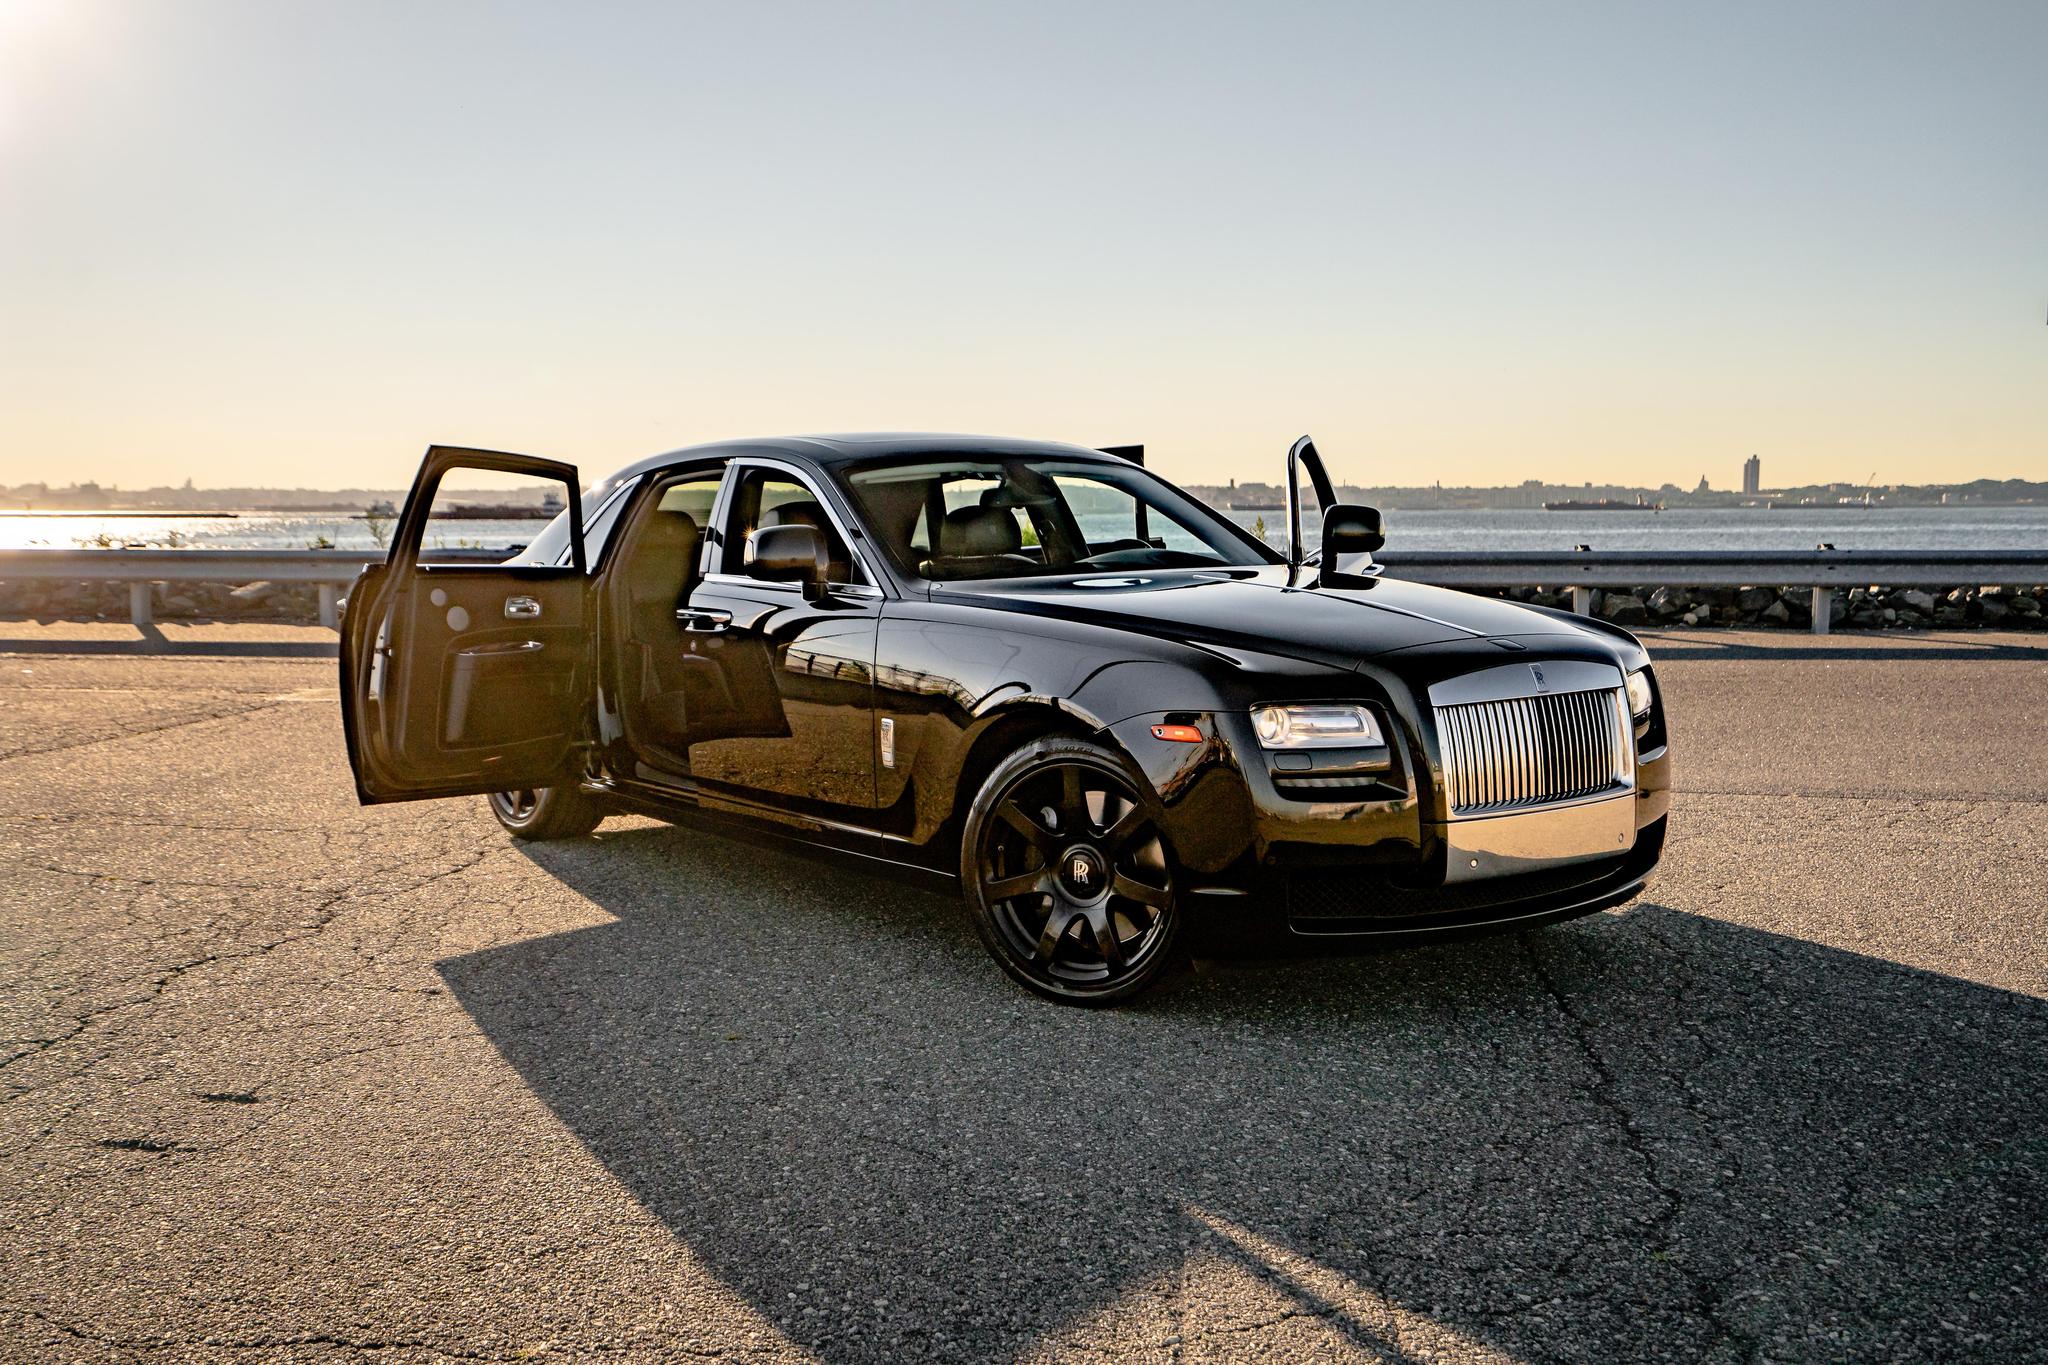 RollsRoyce Motor Cars Miami  Find options at Braman RollsRoyce that you  wont find anywhere else Come in today  Facebook